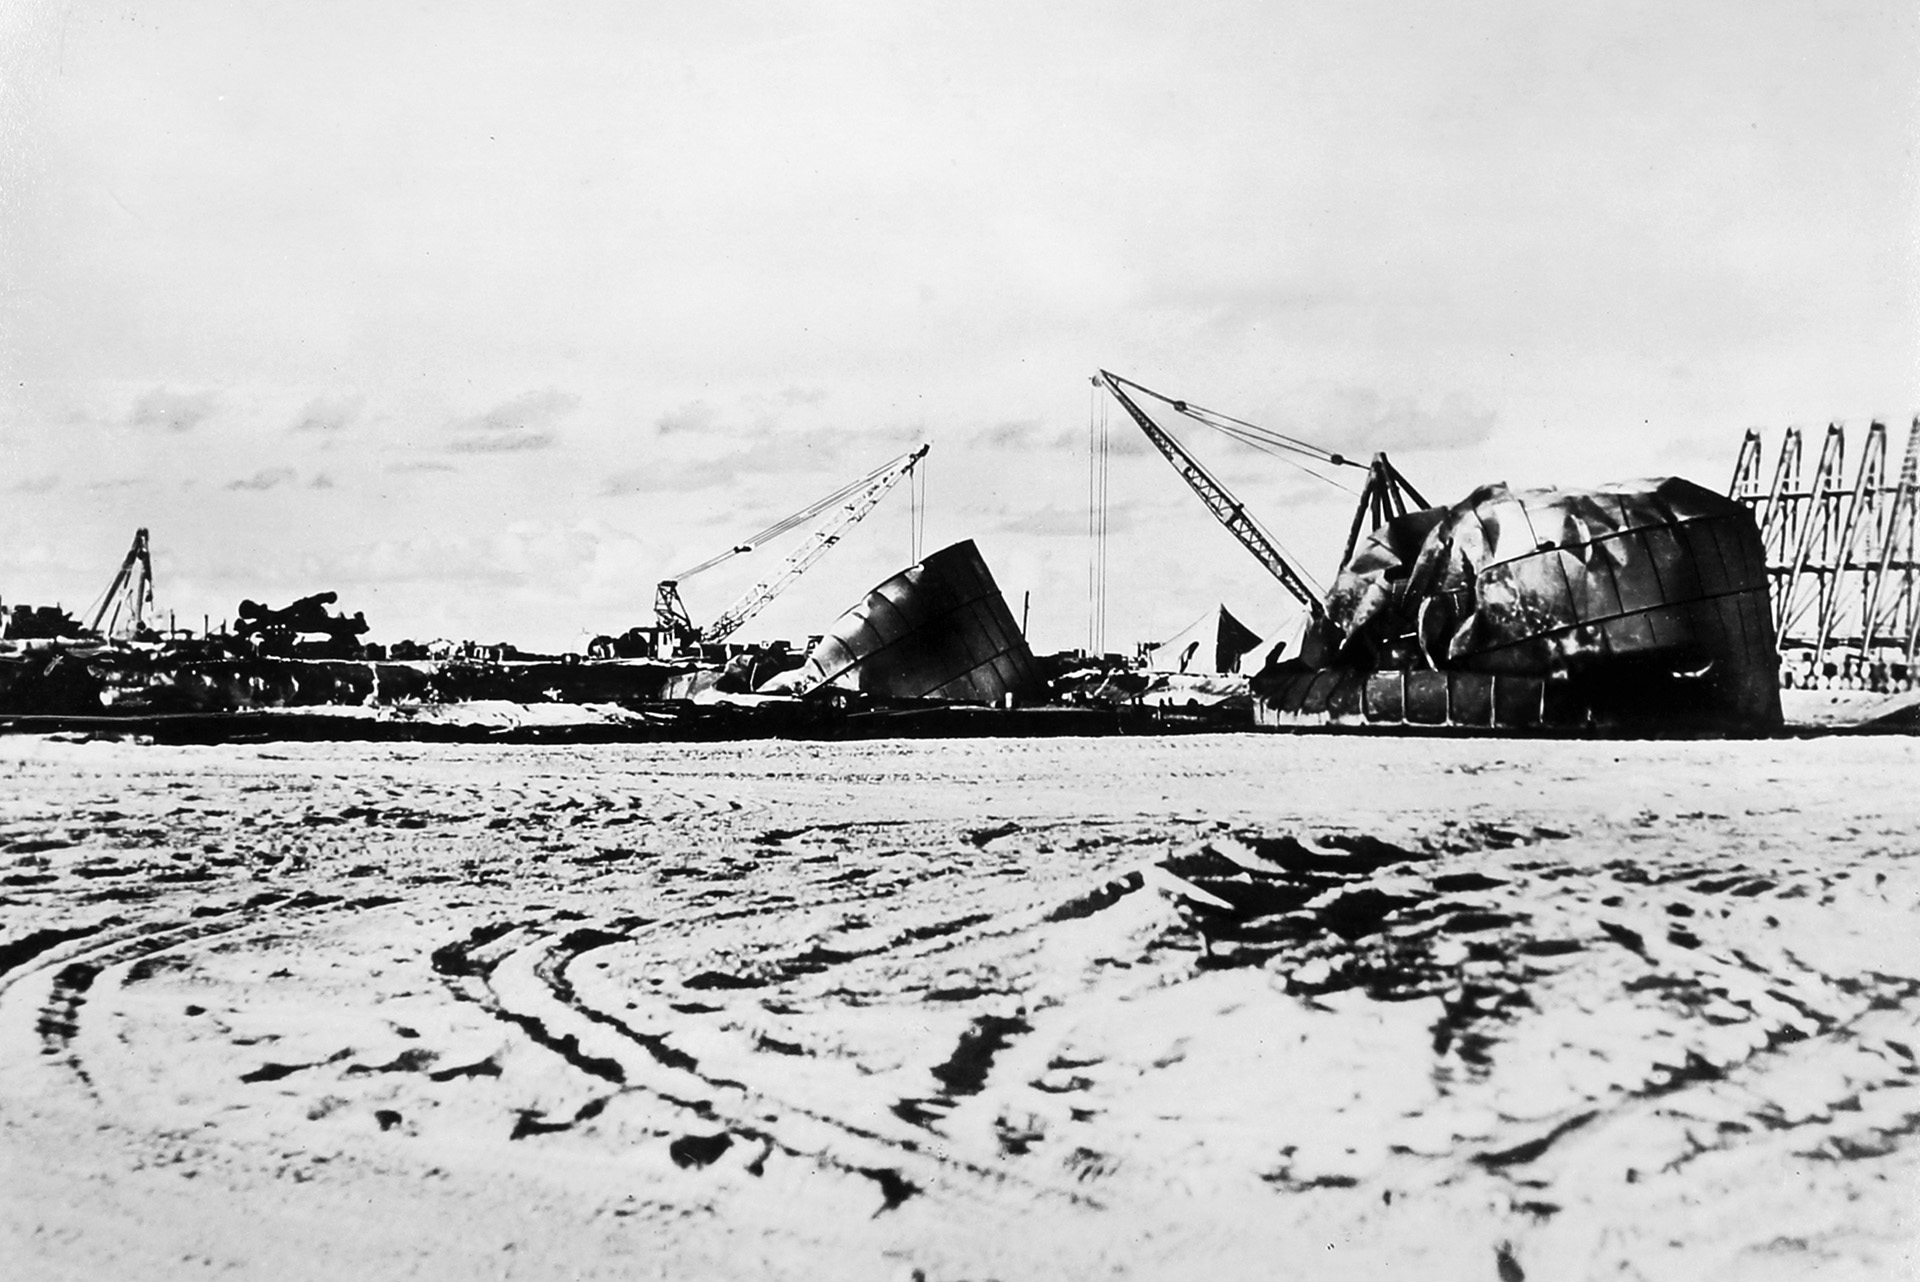  Burned and crumpled fuel storage tanks on Wake, photographed by the Japanese after the island was captured on December 23, 1941.